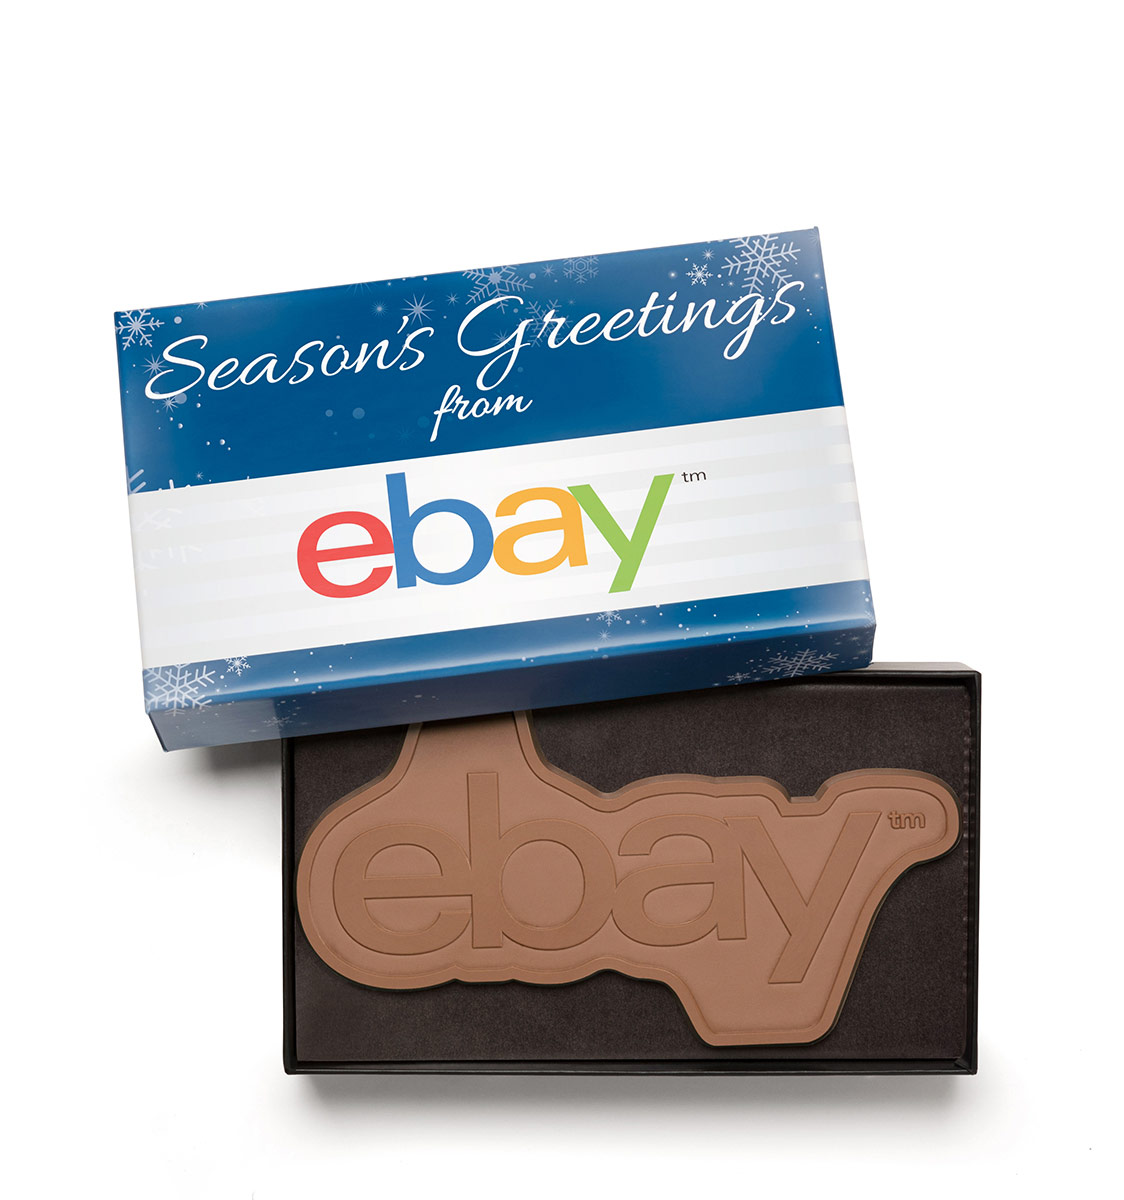 Is Chocolate a Good Gift? - Totally Chocolate